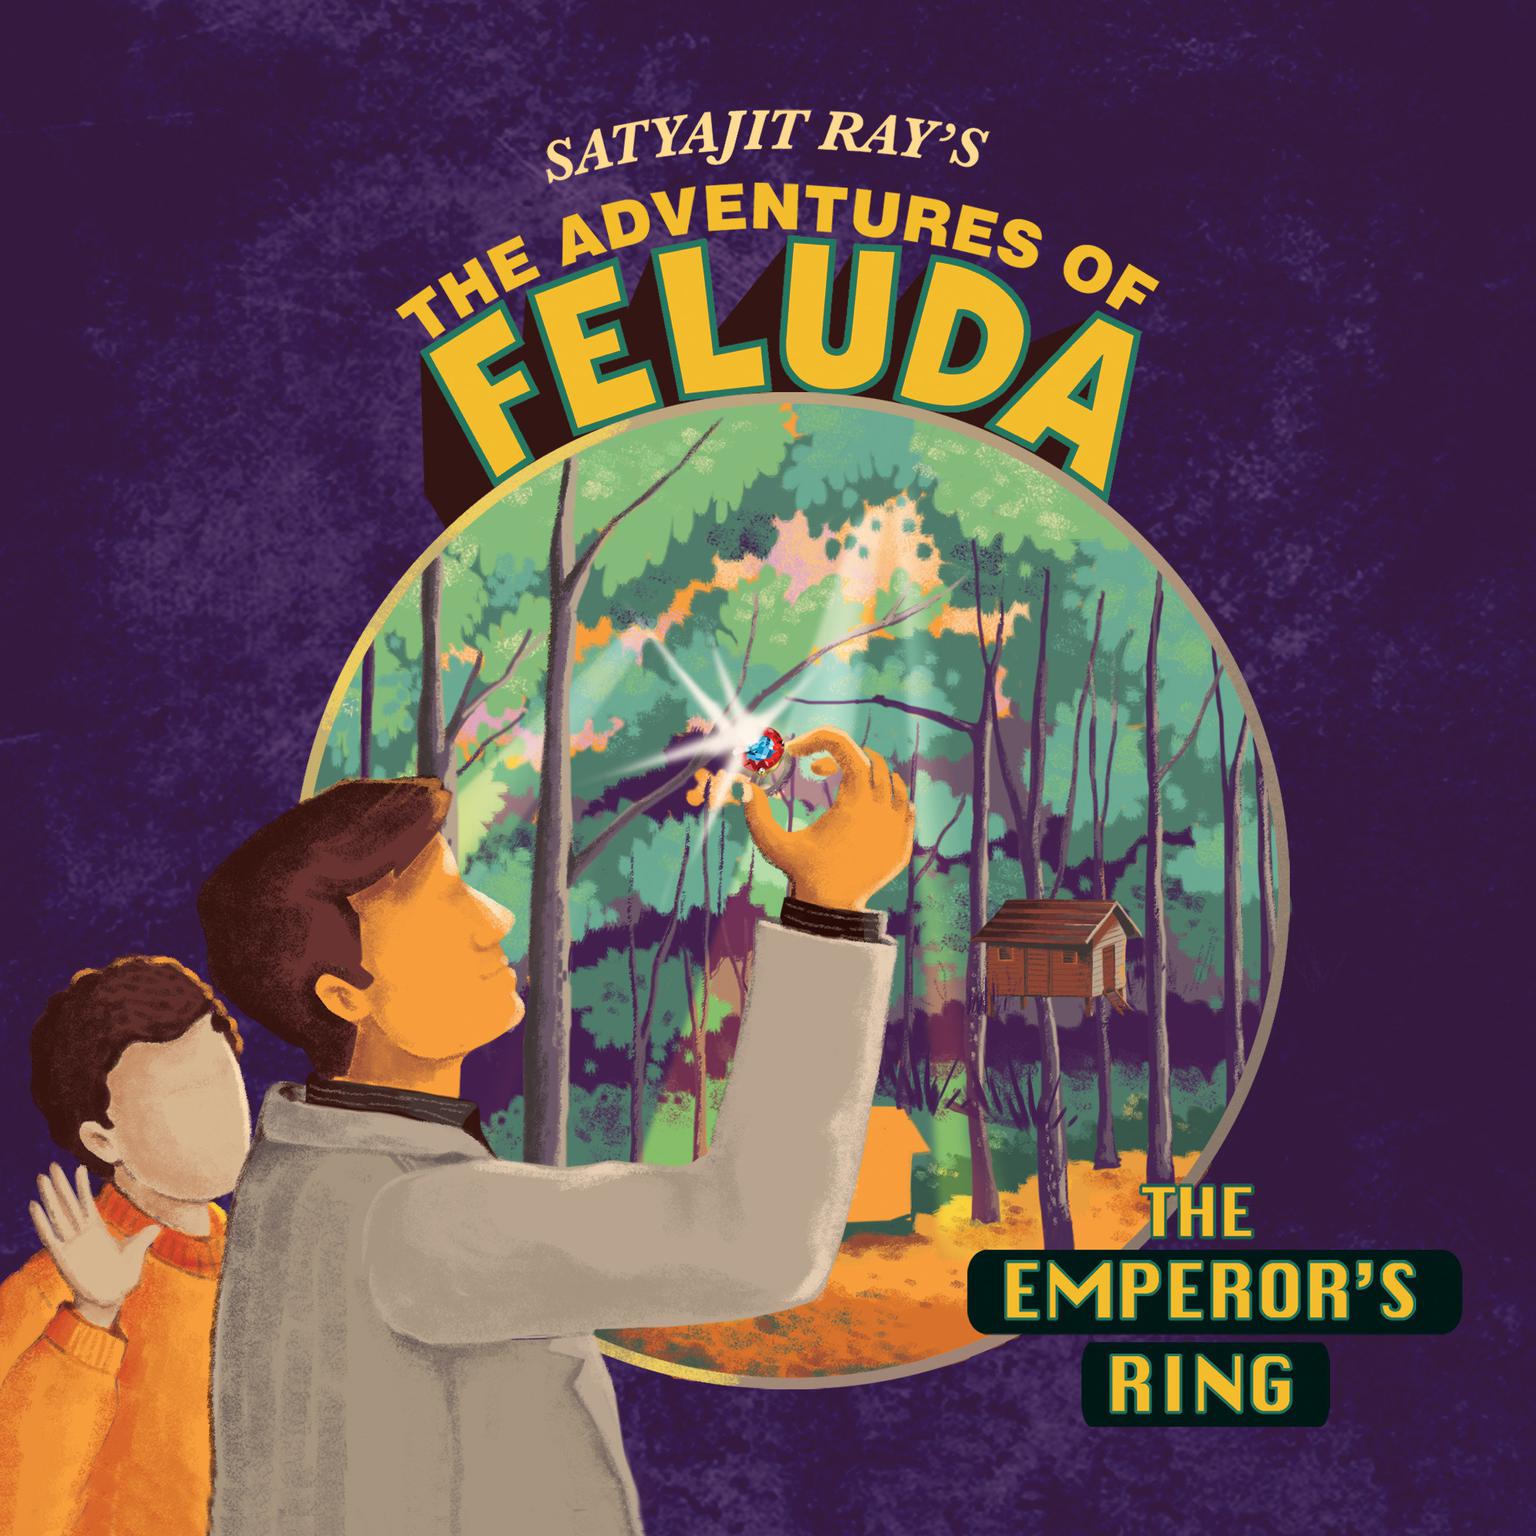 The Adventure Of Feluda: Emperors Ring Audiobook, by Satyajit Ray